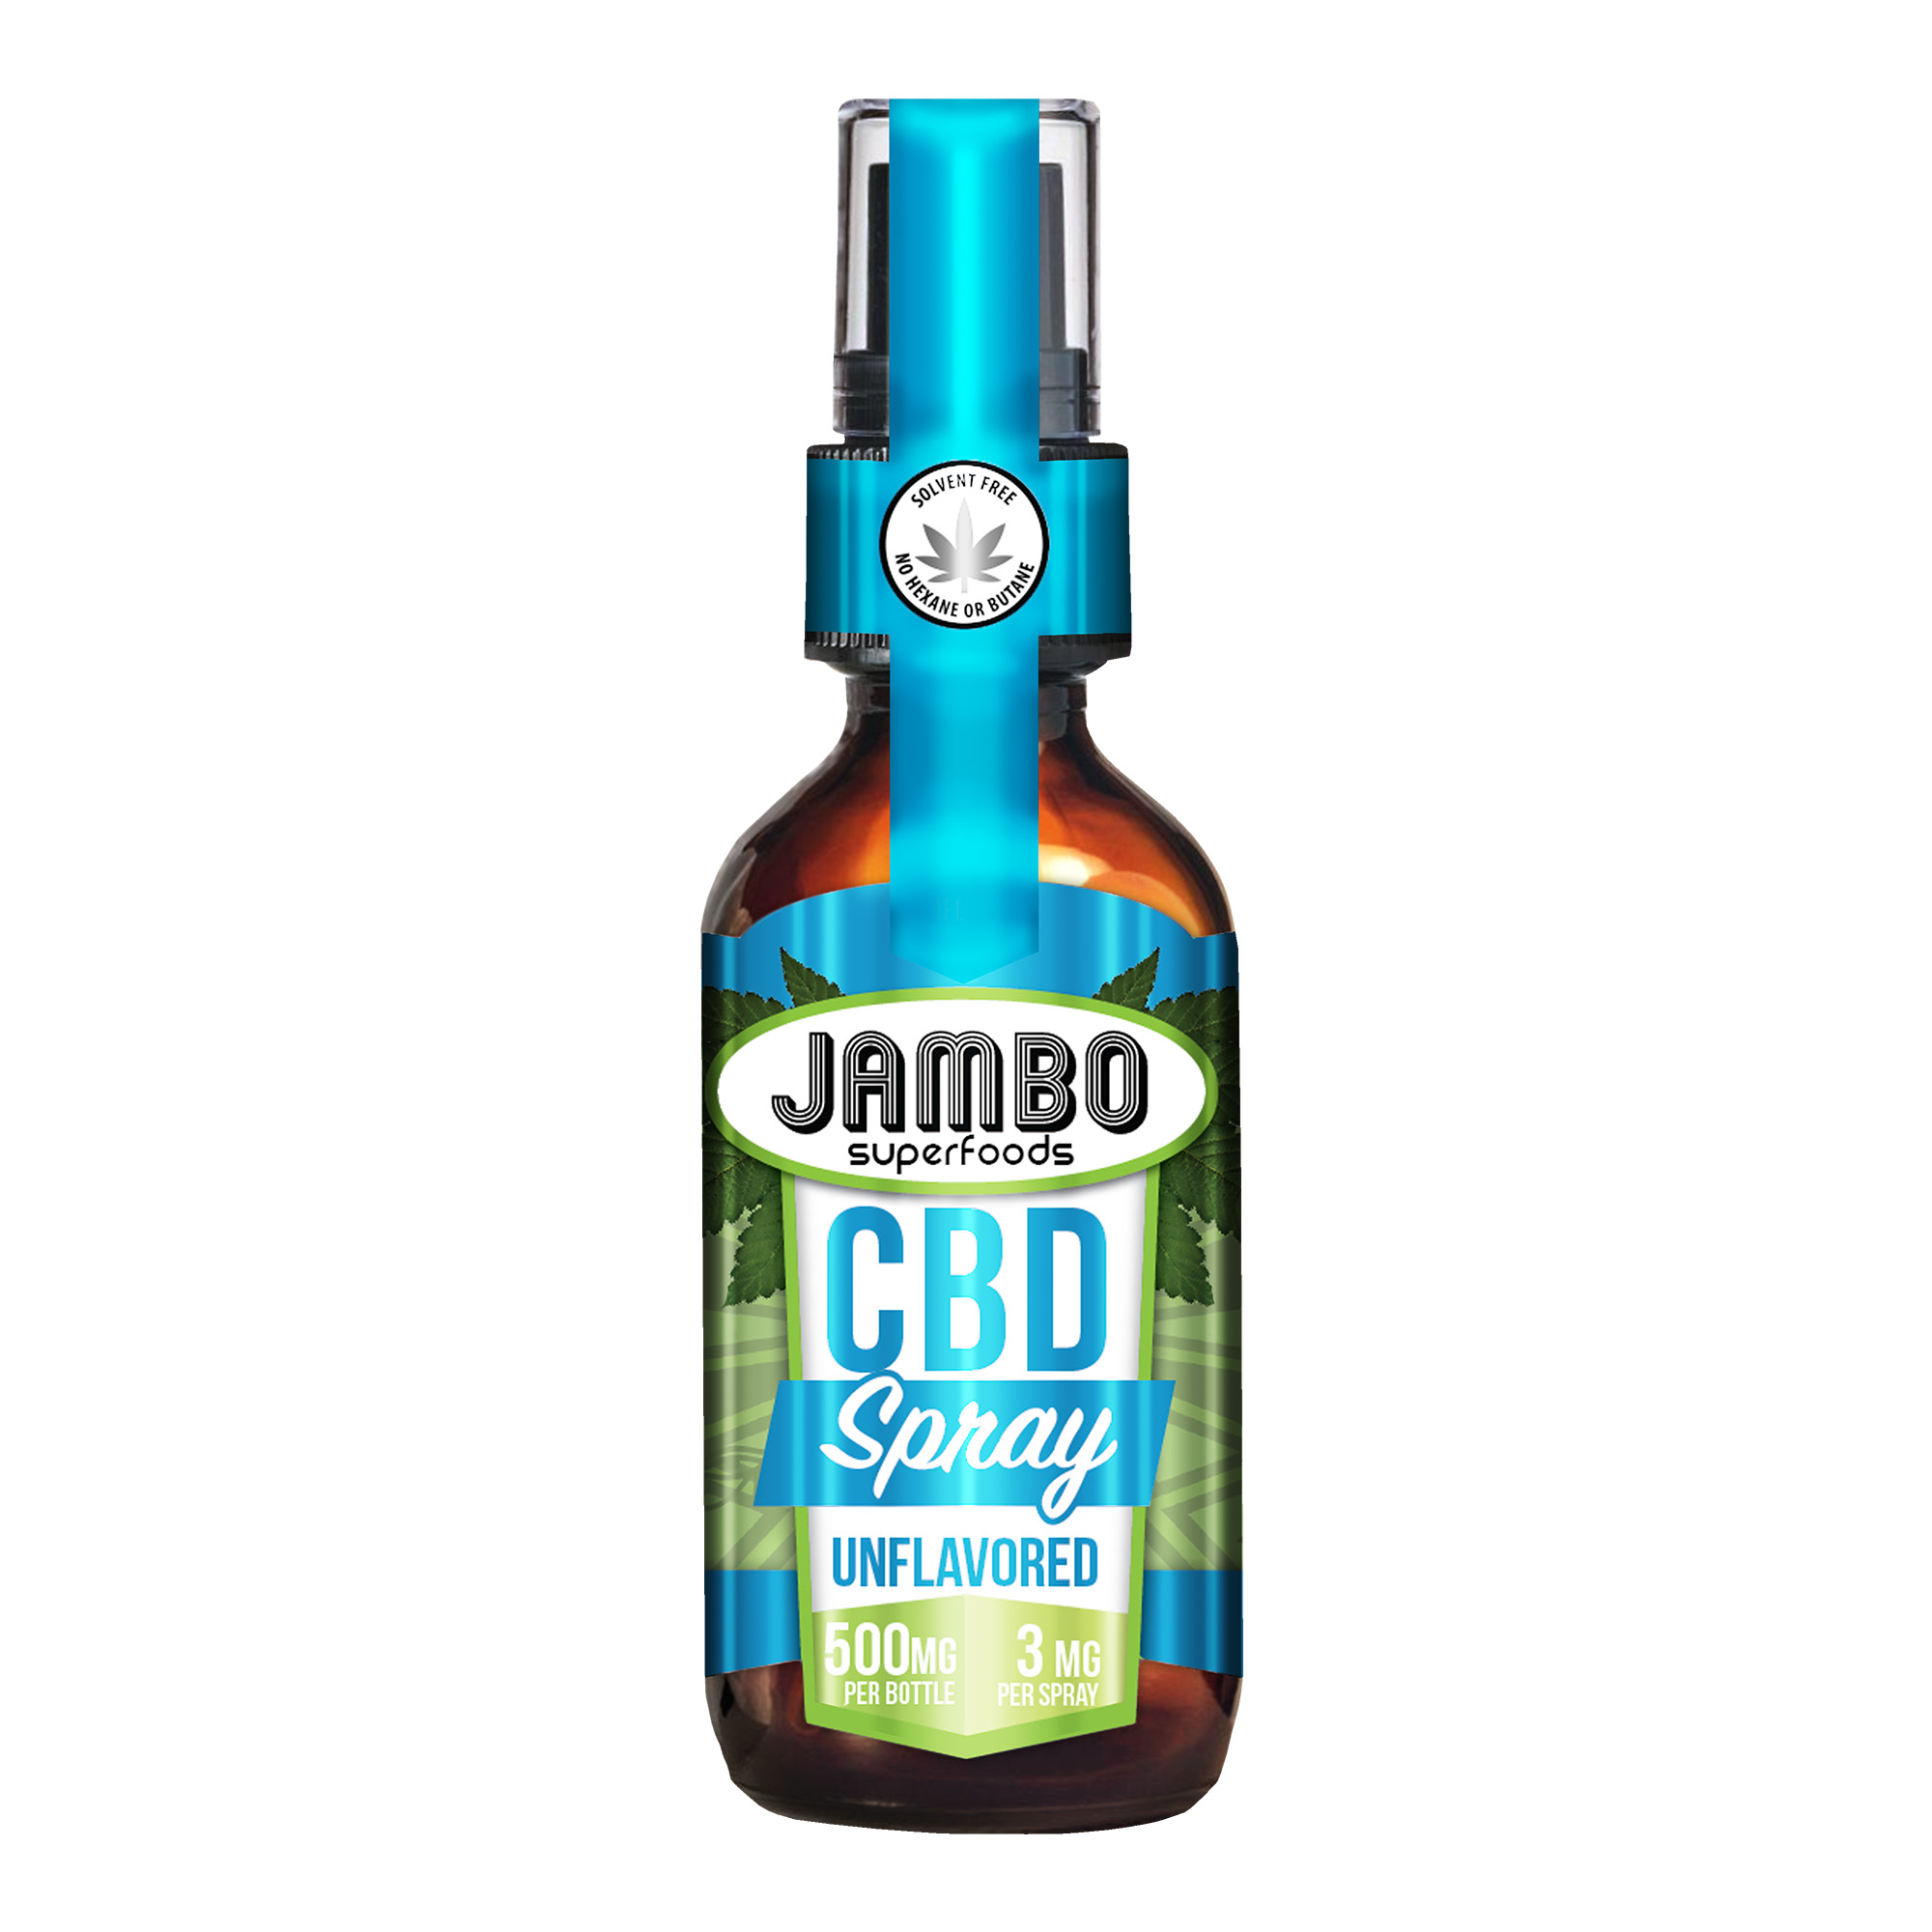 Jambo Superfoods CBD breath spray unflavored 500mg product image